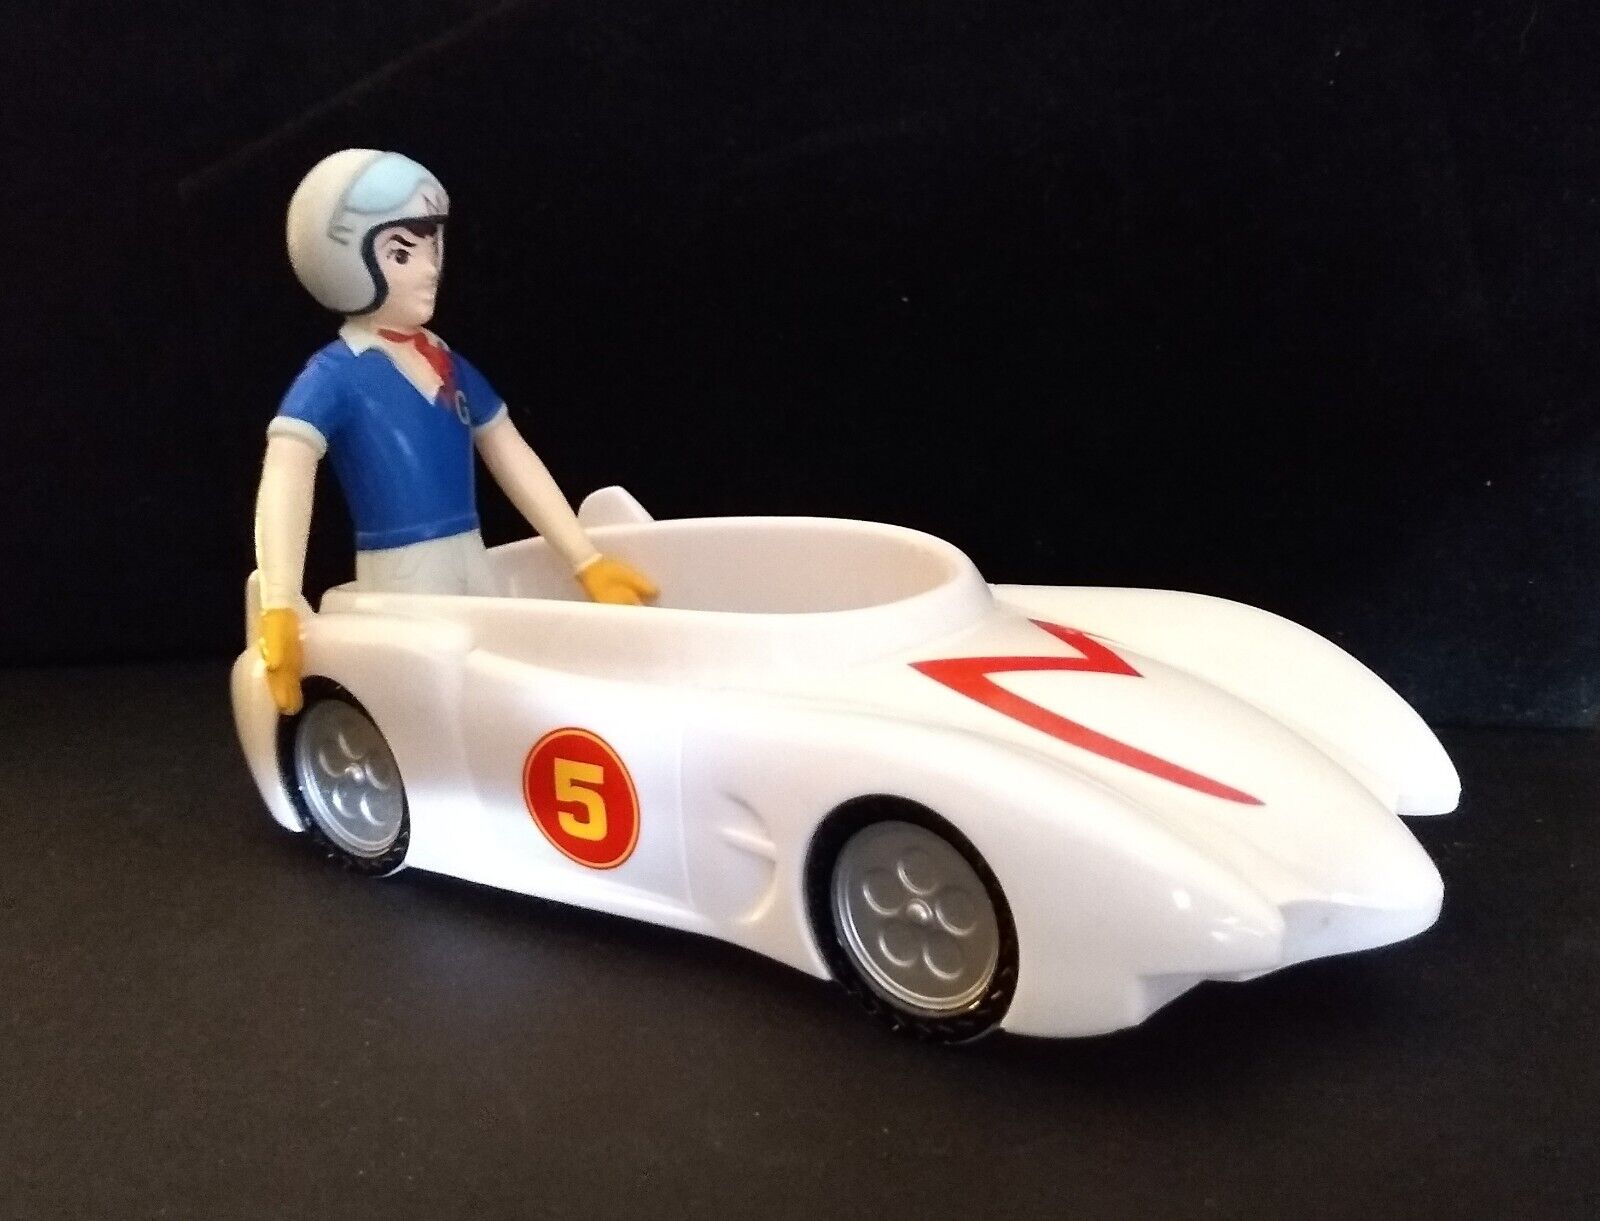 2008 Speed Racer Bendable & Mach 5 Cereal Bowl , General Mills 2008 Promo. 